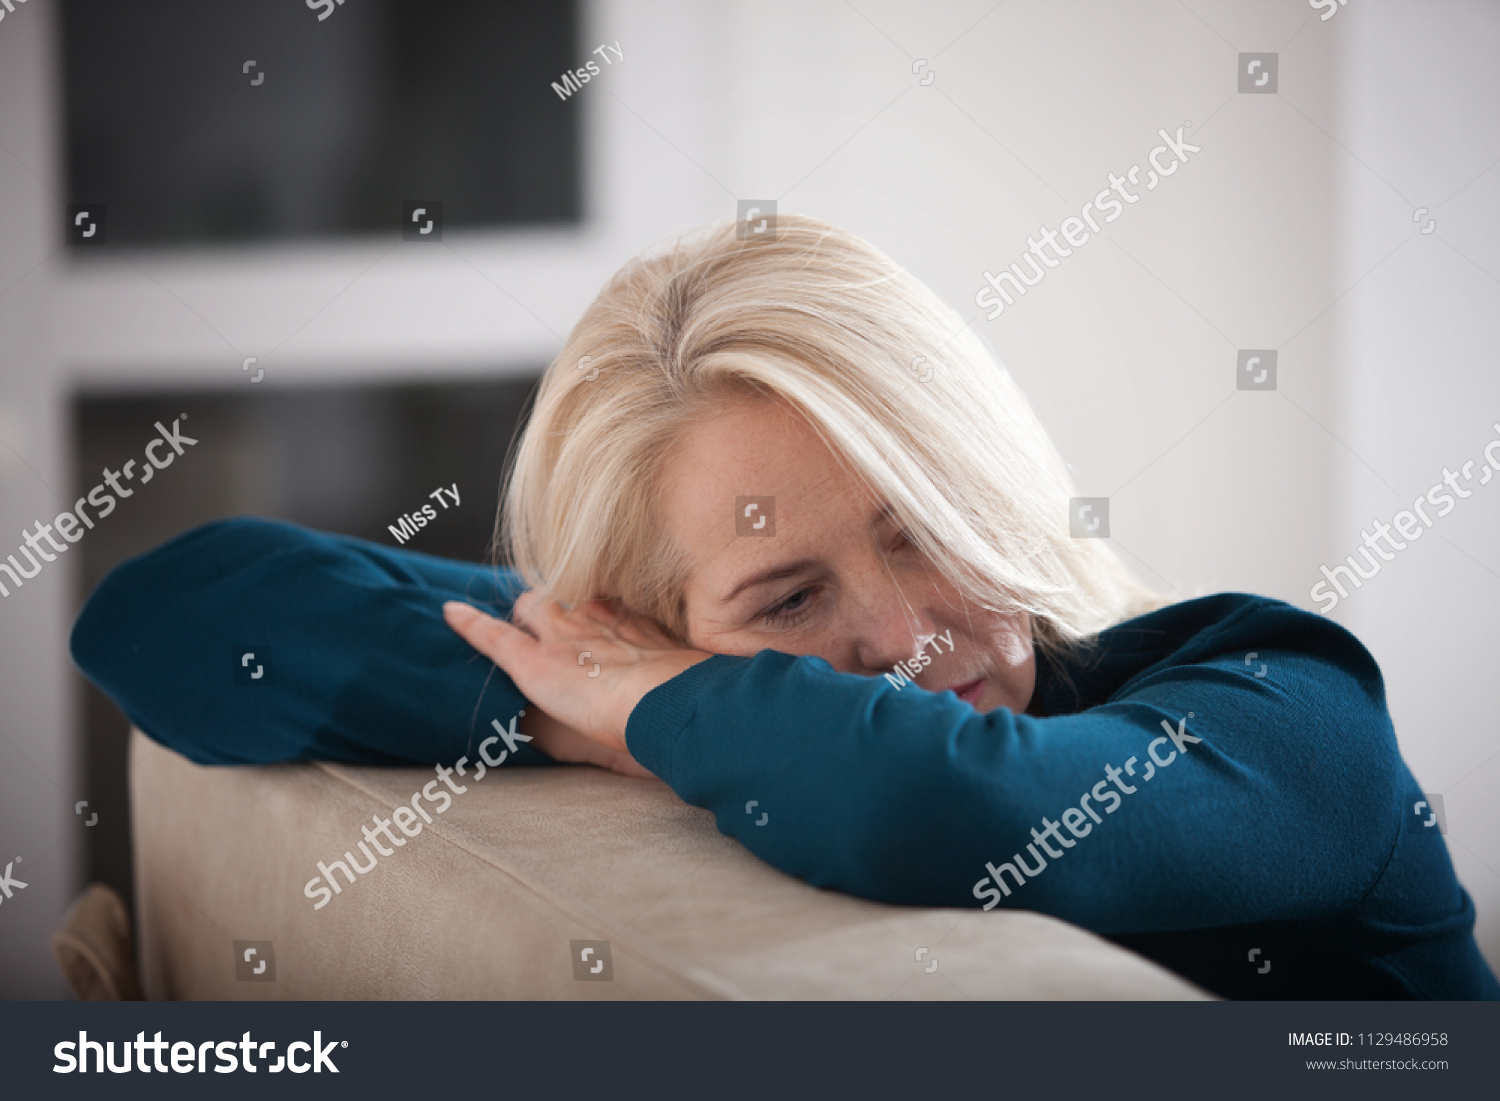 Sad depressed woman at home sitting on the couch, looking down and touching her forehead, loneliness and pain concept #1129486958